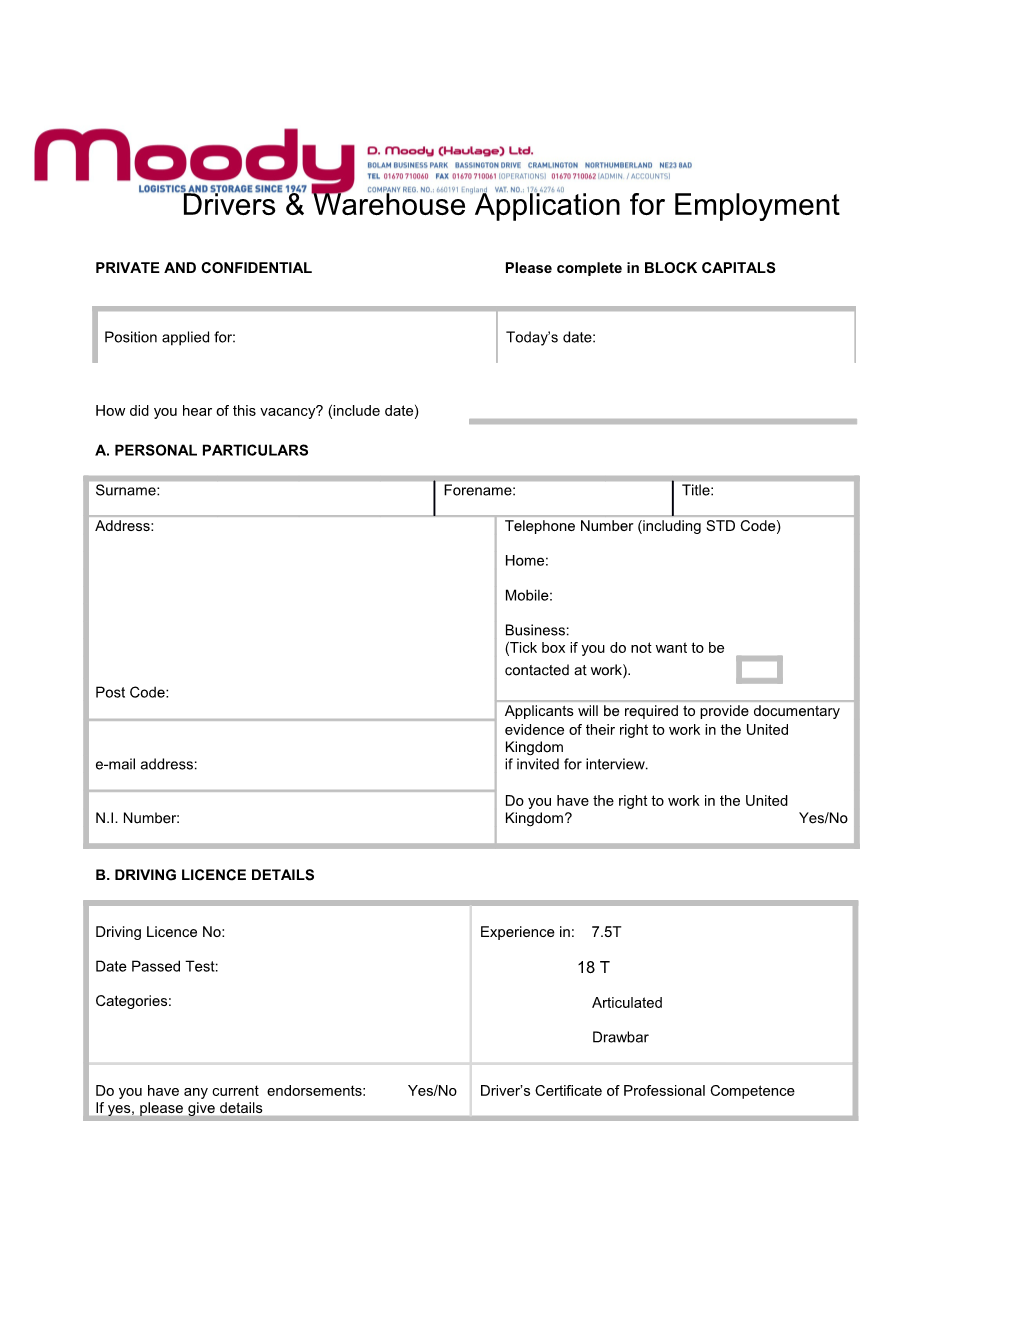 Application - Hourly Paid